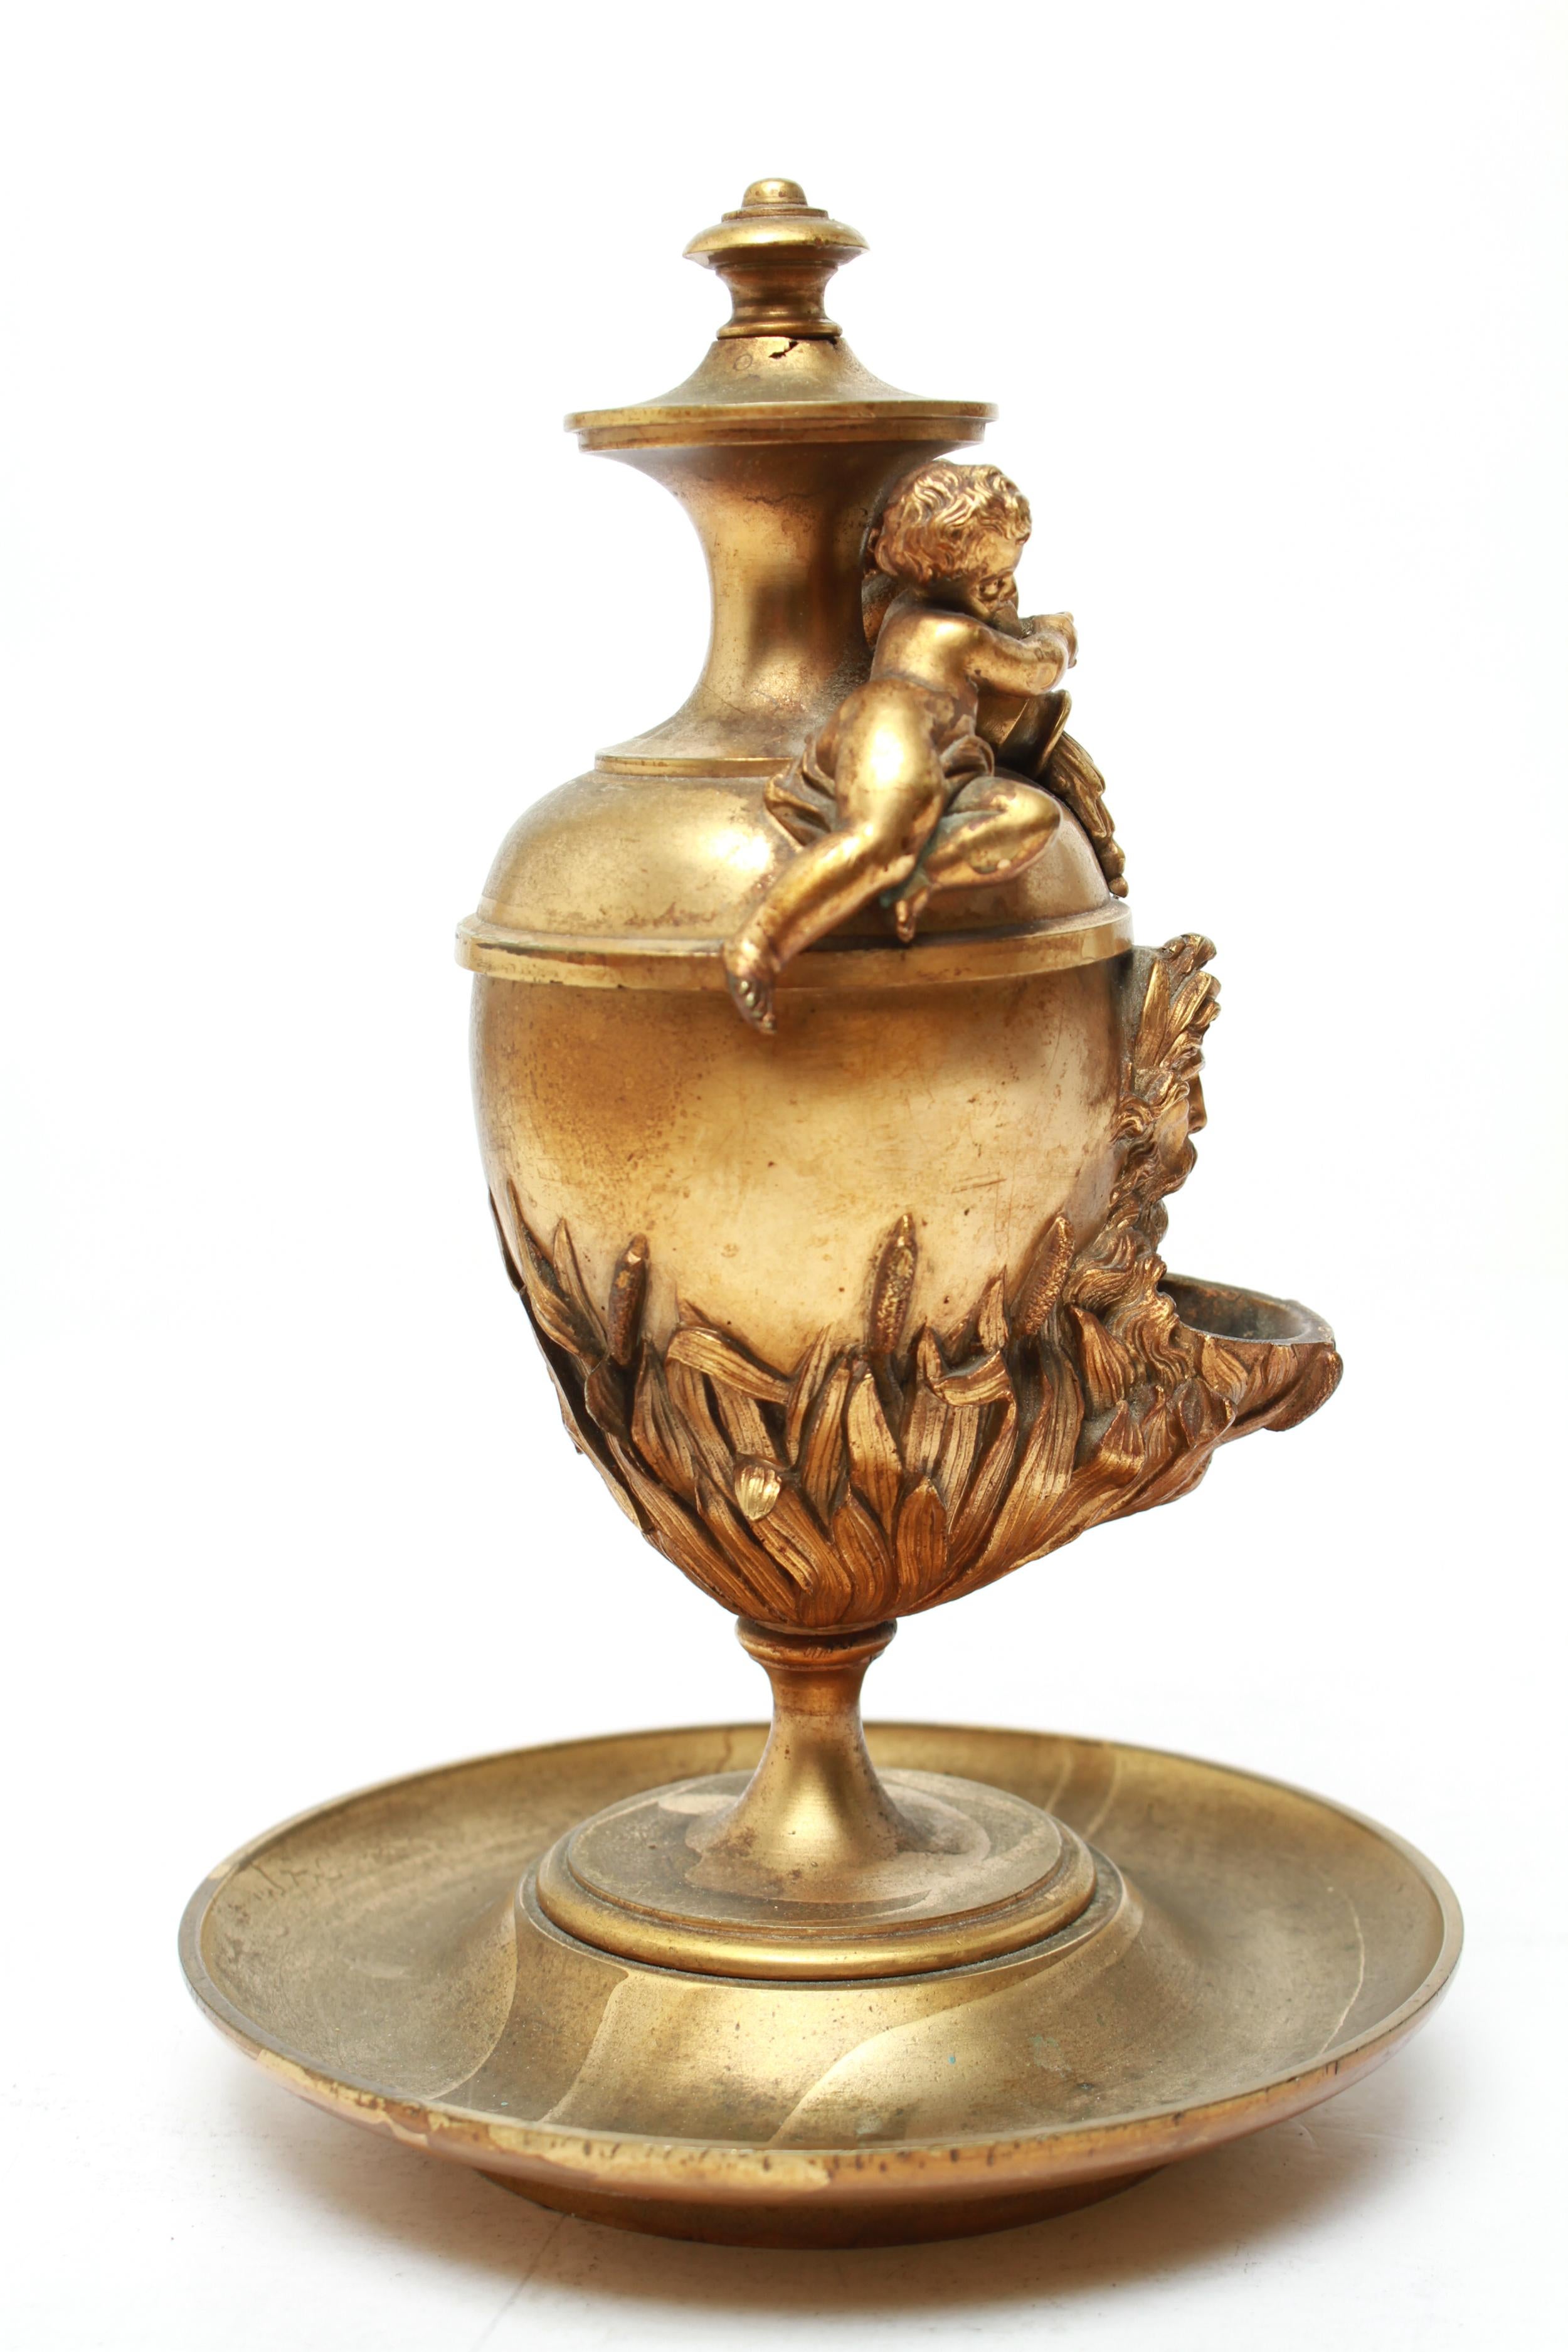 Neoclassical Revival gilt bronze figurative oil lamp in egg shaped receptacle with locking cover and spout. The piece has high relief putti, swags, a Classical head of a man, and cattails. In great vintage condition.